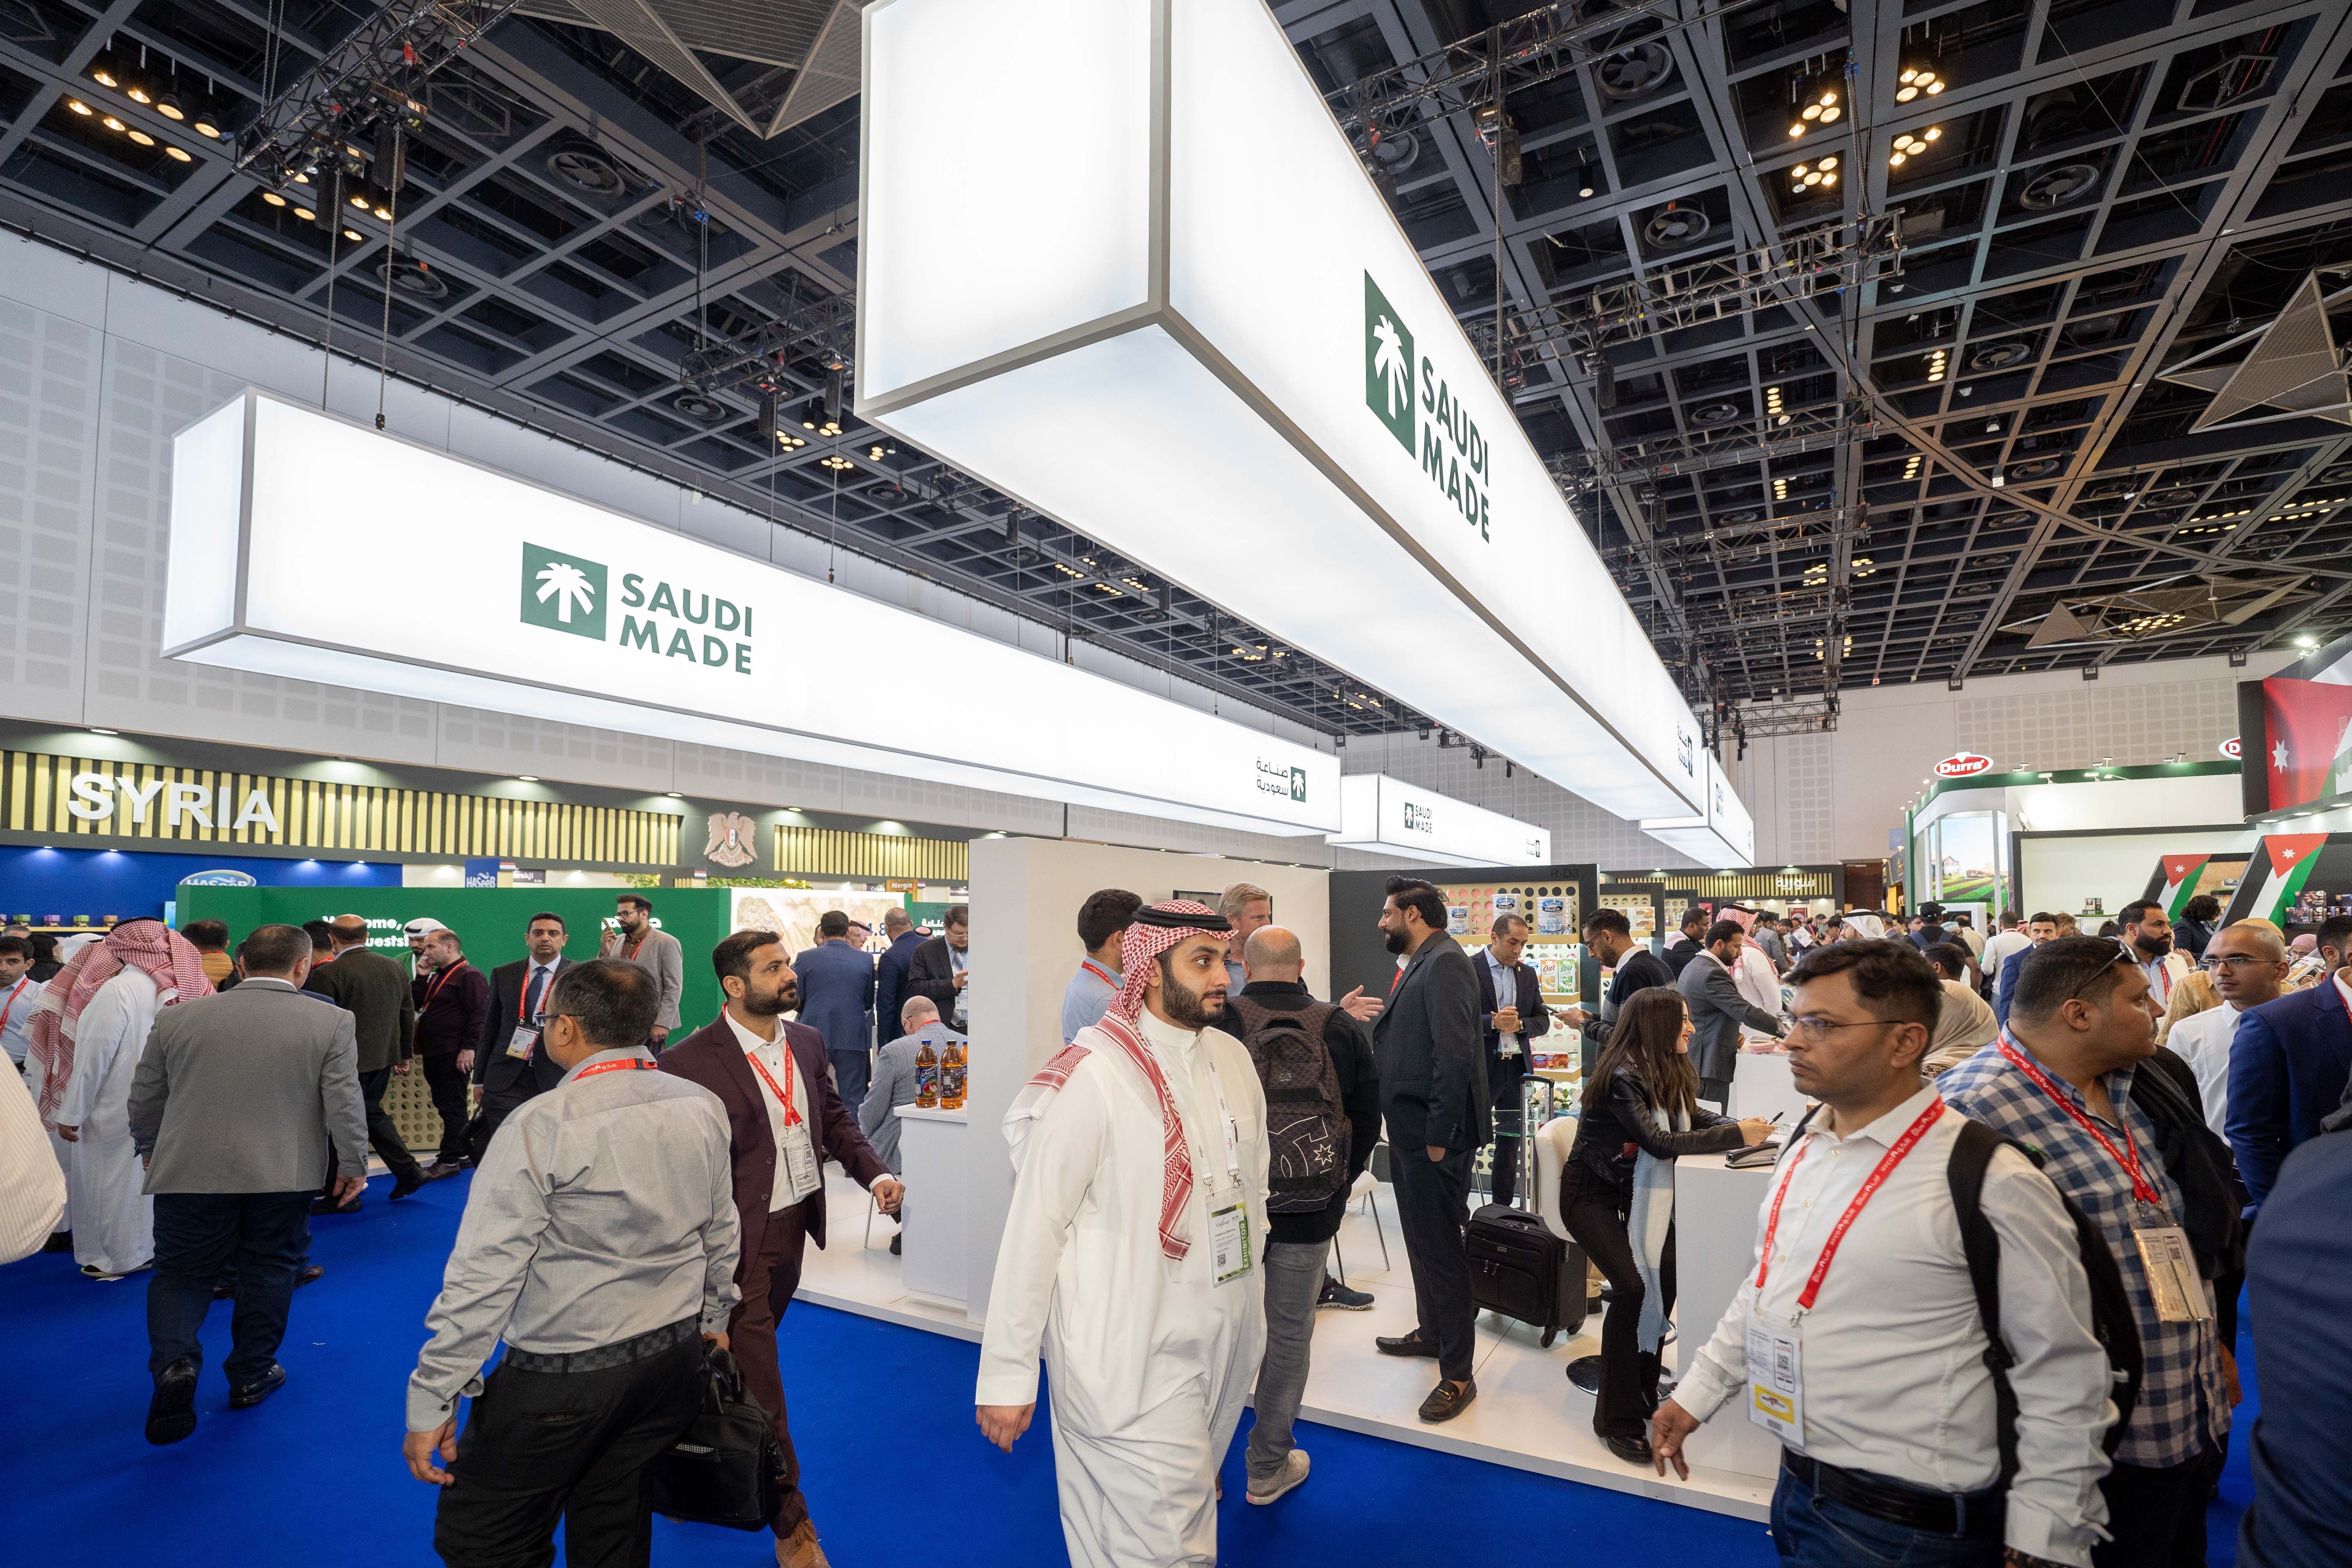 The inaugural Saudi Food Show 2023 sells out this week at GULFOOD, with four months to launch opening. Organisers roll out immediate expansion plan for the largest food event in KSA.